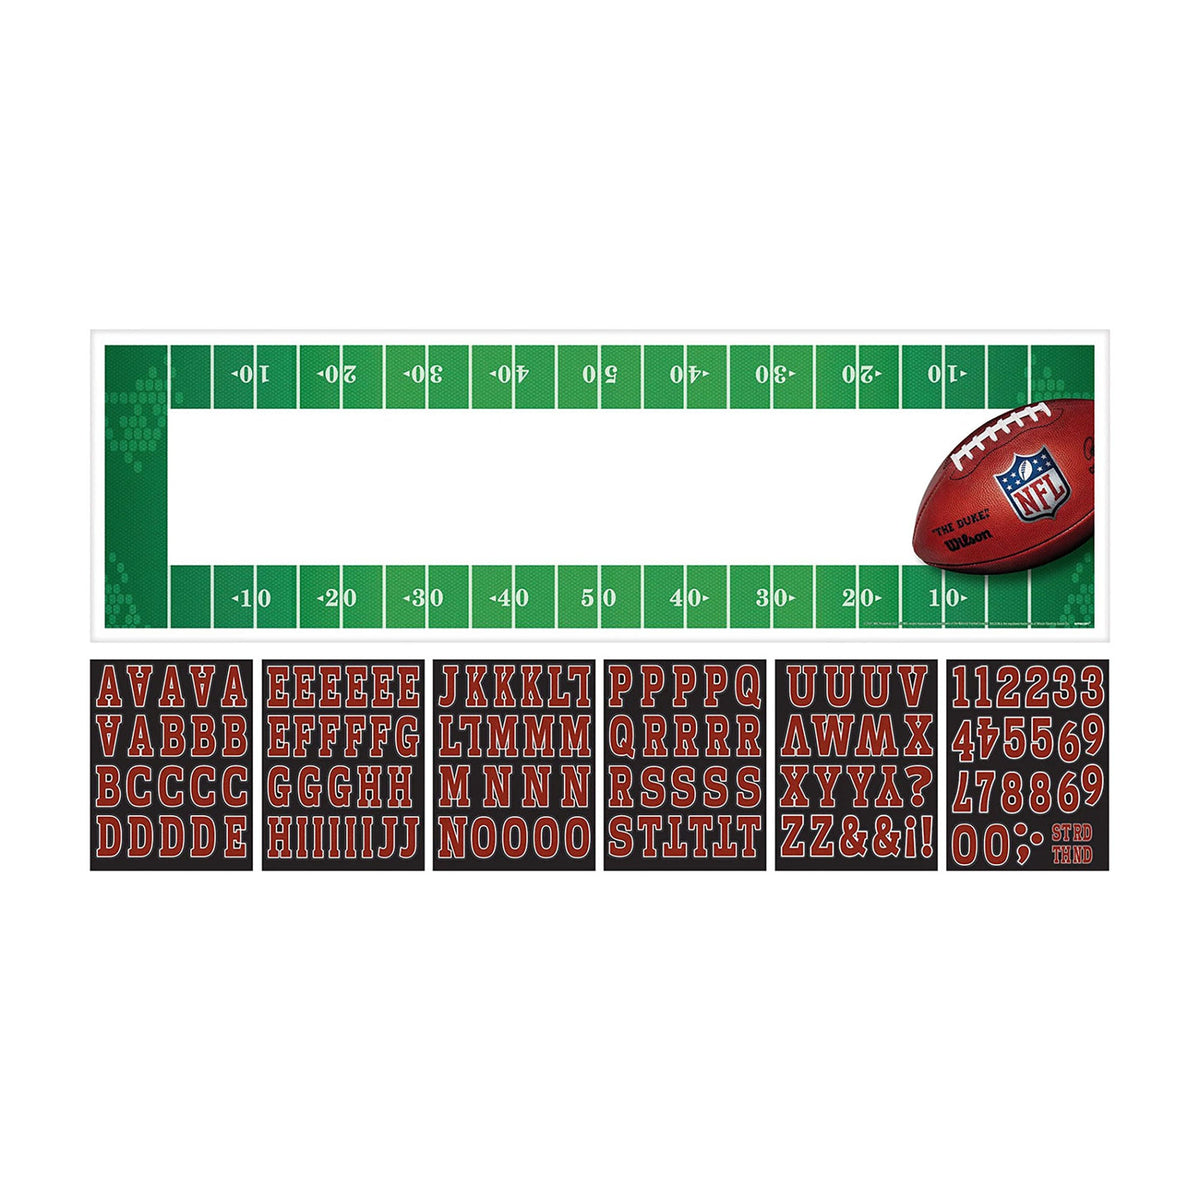 AMSCAN CA Superbowl NFL Super Bowl Party Giant Customizable Banner, 65 X 20 Inches, 1 Count